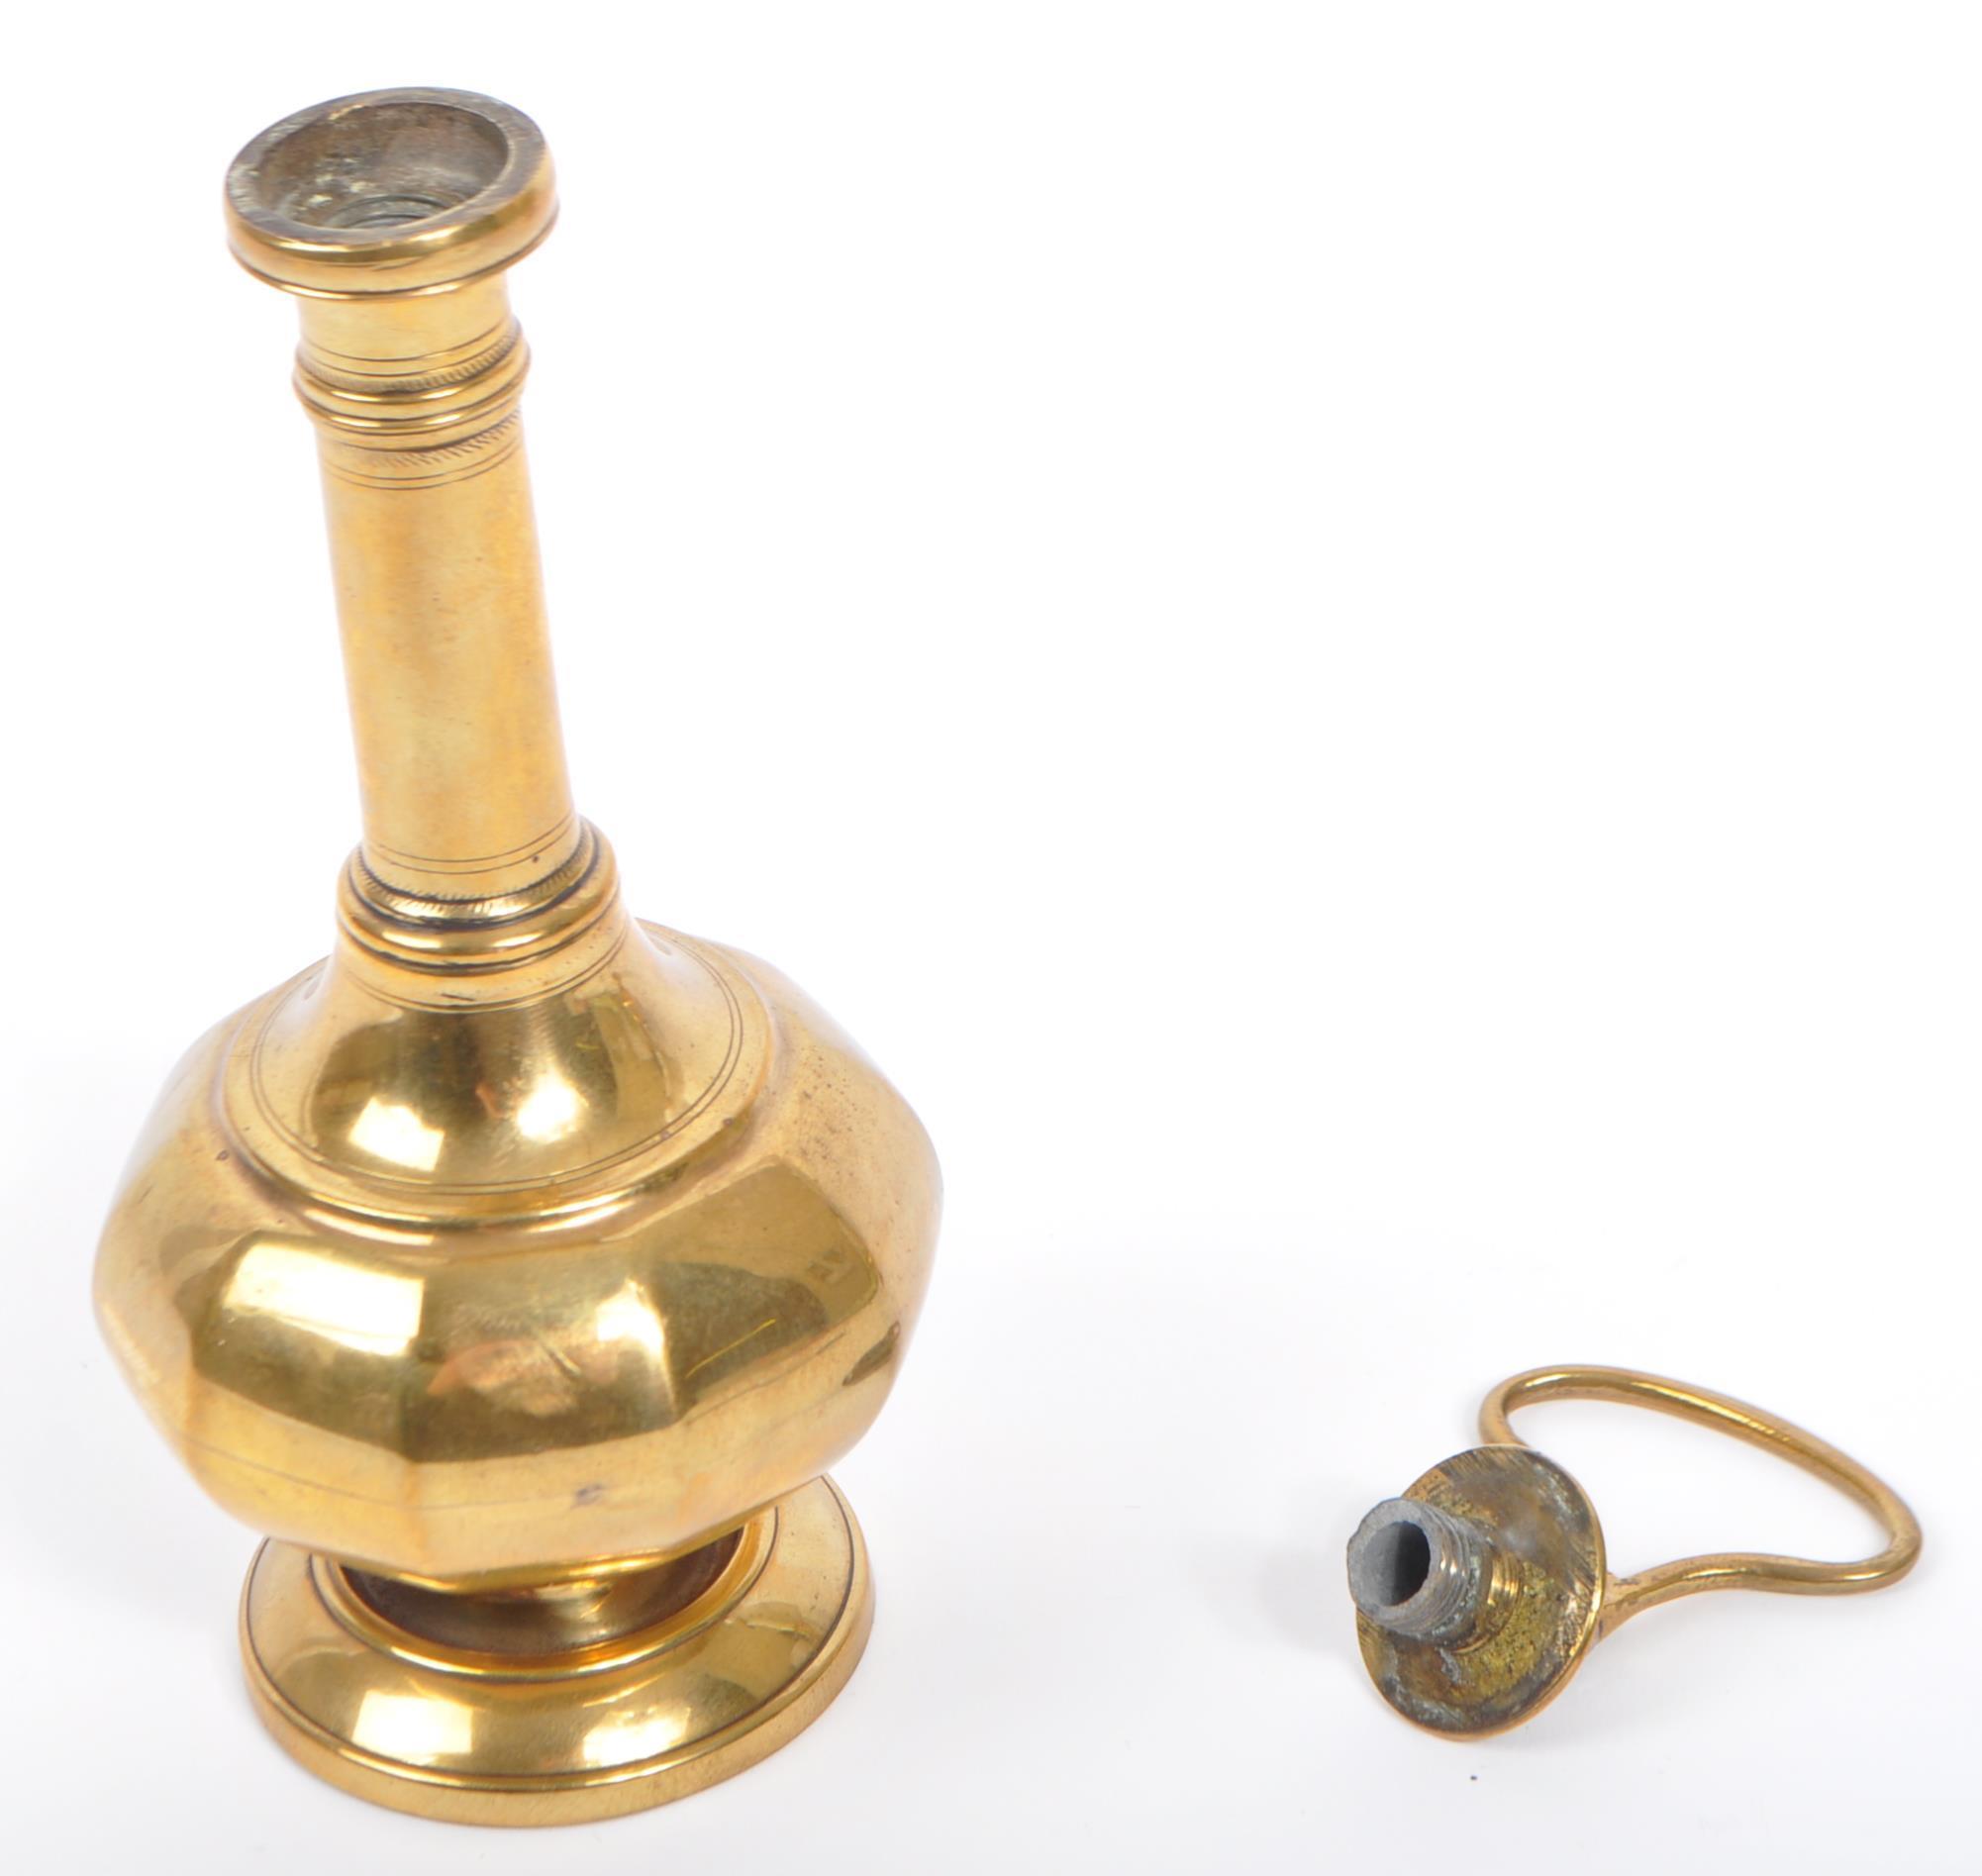 PAIR OF EARLY 20TH CENTURY BRASS ROSE WATER SHAKERS - Image 2 of 5